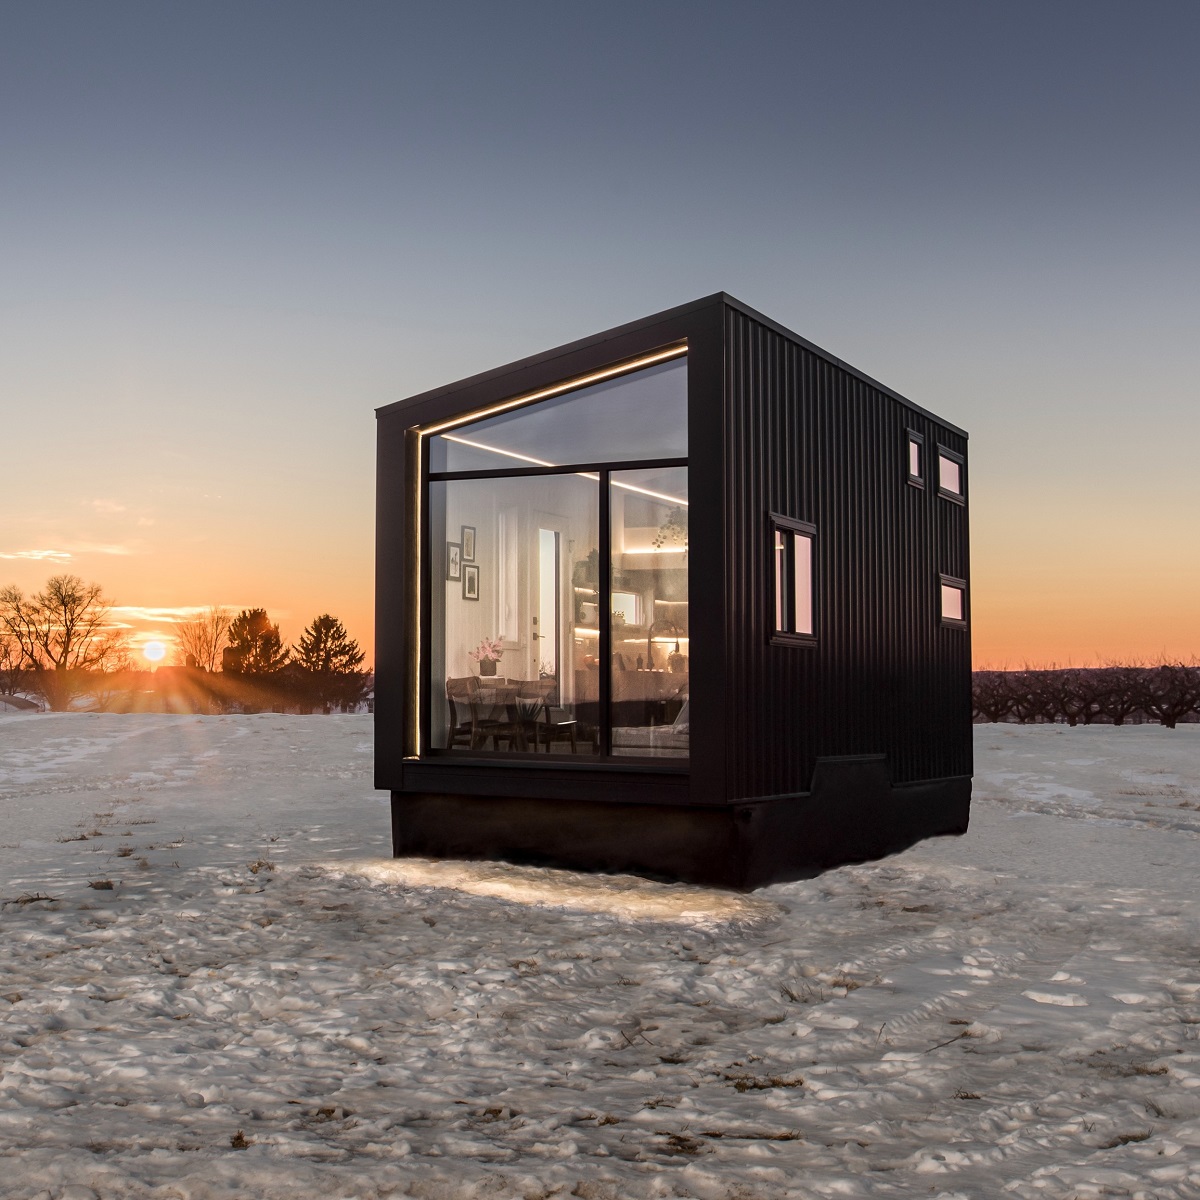 Black and glass, cube-shaped tiny home set in field of snow with setting sun,